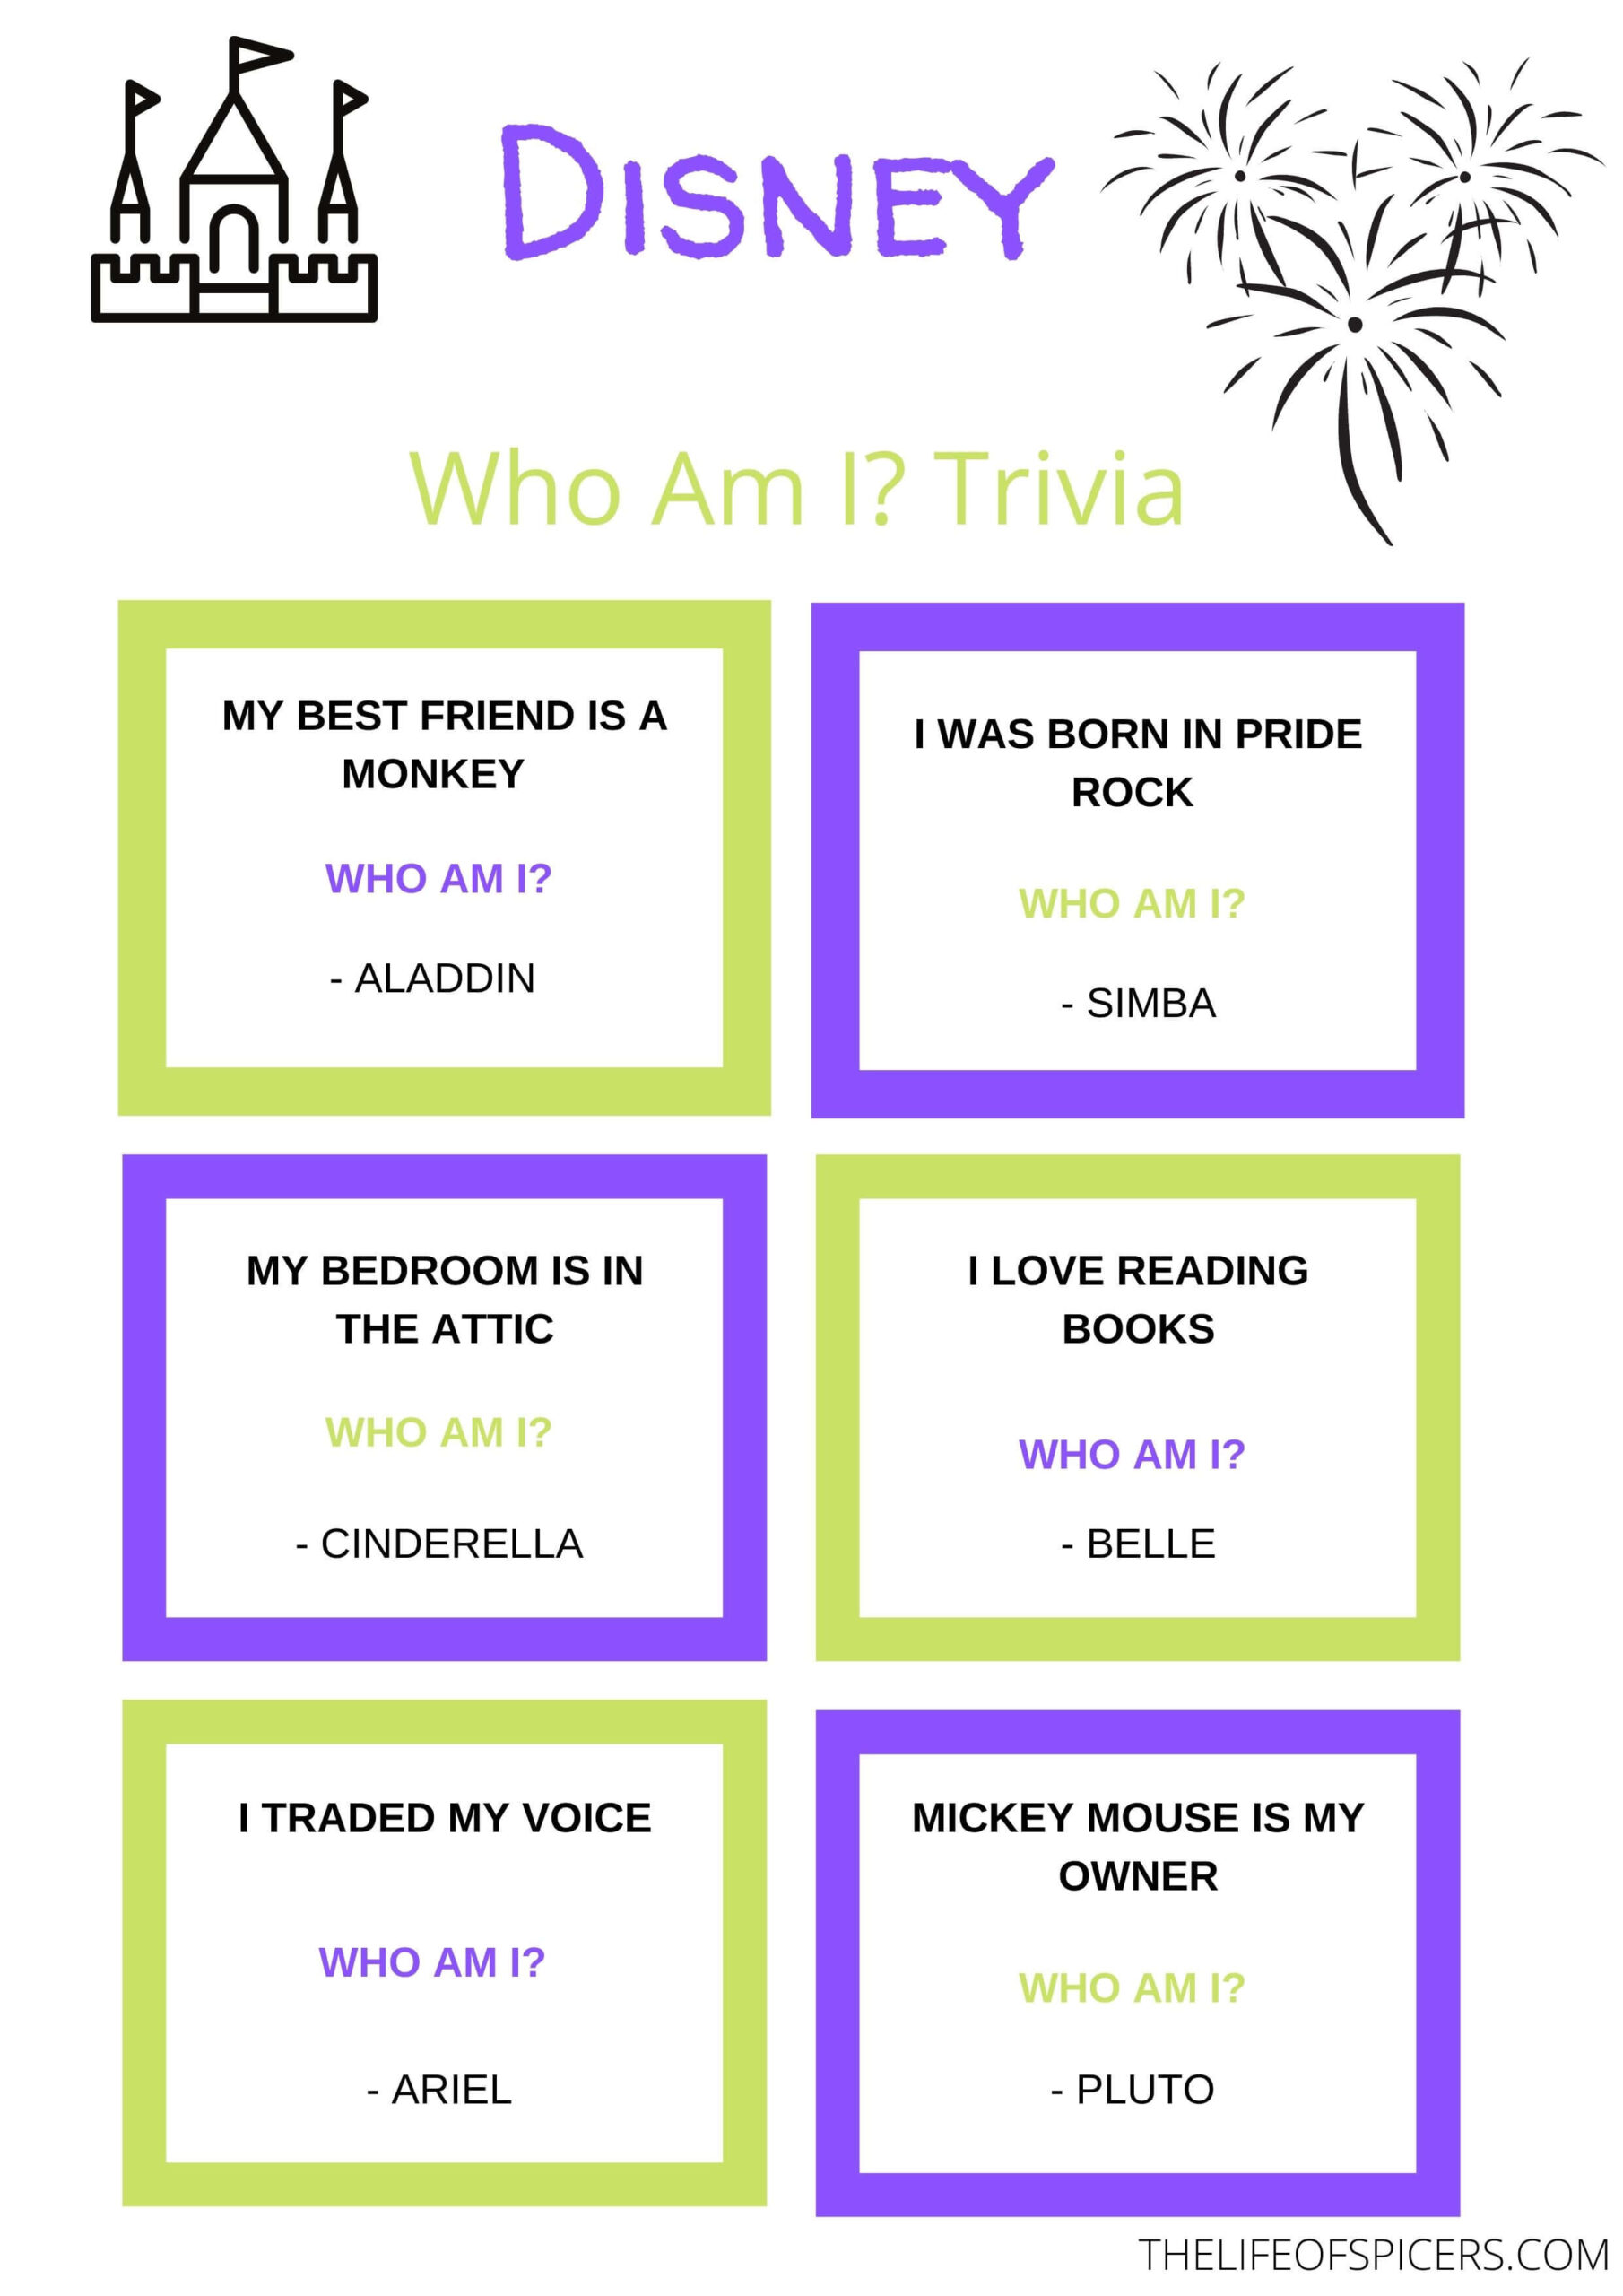 Disney Who Am I Quiz - FREE PRINTABLE - The Life Of Spicers